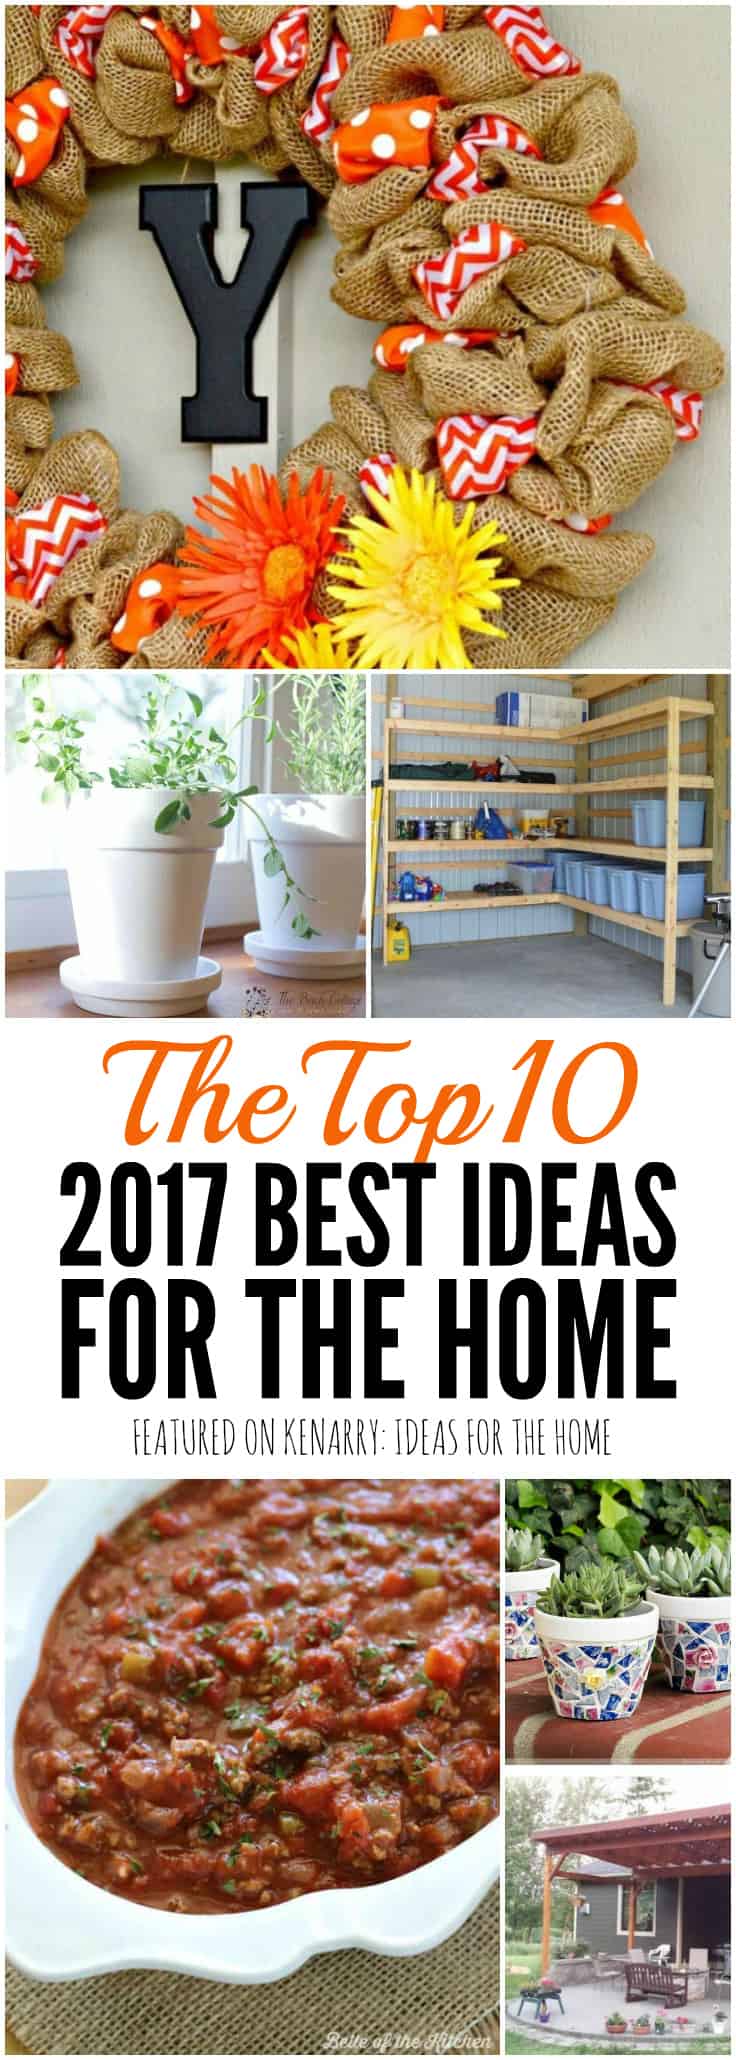 Wow! These were the top 10 recipes, crafts, home decor and DIY projects in 2017. I can't wait to try these popular ideas for the home.